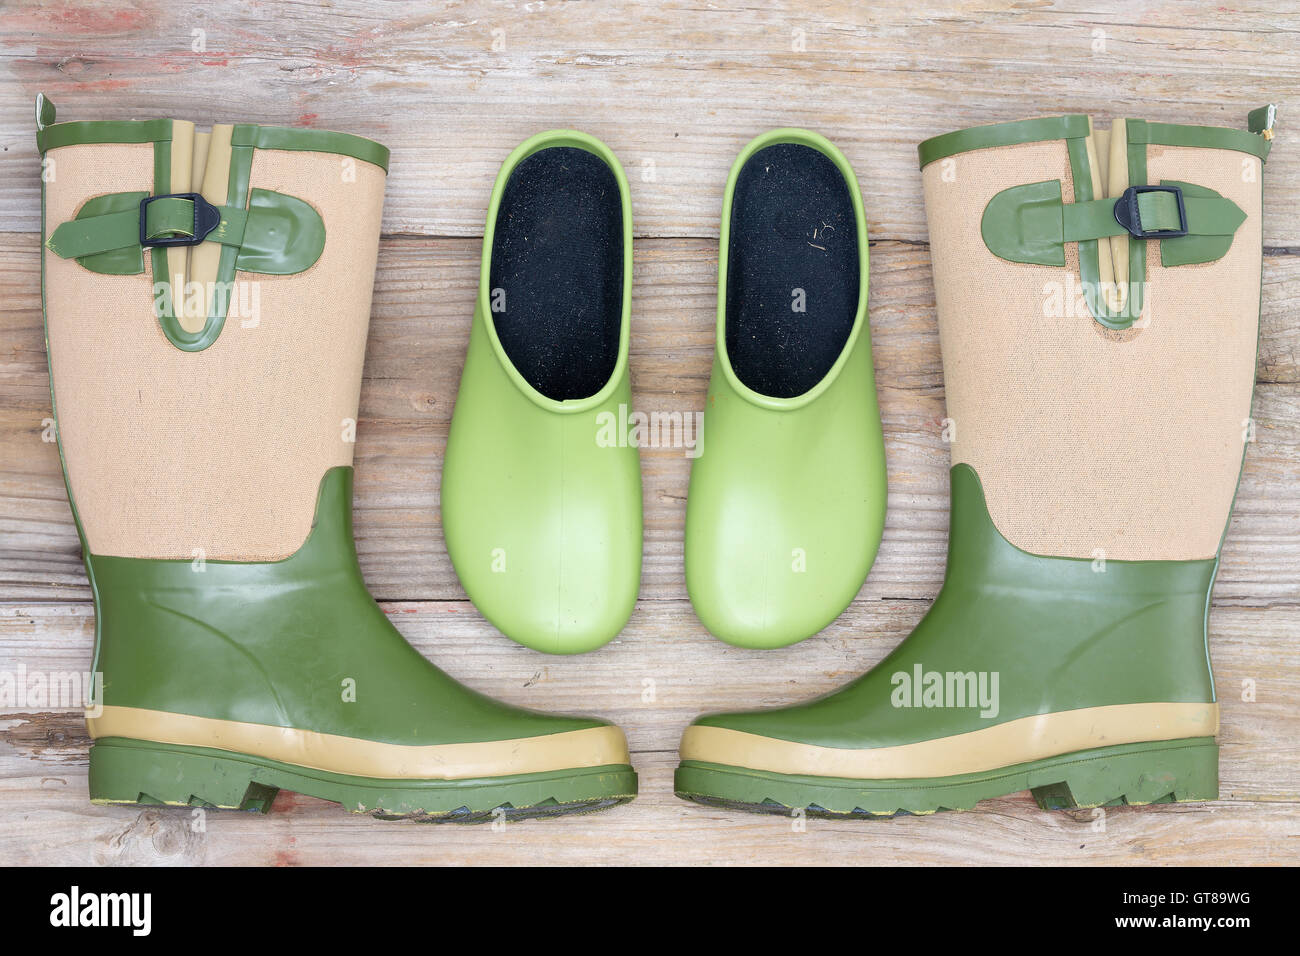 Stylish footwear for the garden with green rubber clogs and elegant matching green and beige gumboots in a symmetrical arrangeme Stock Photo